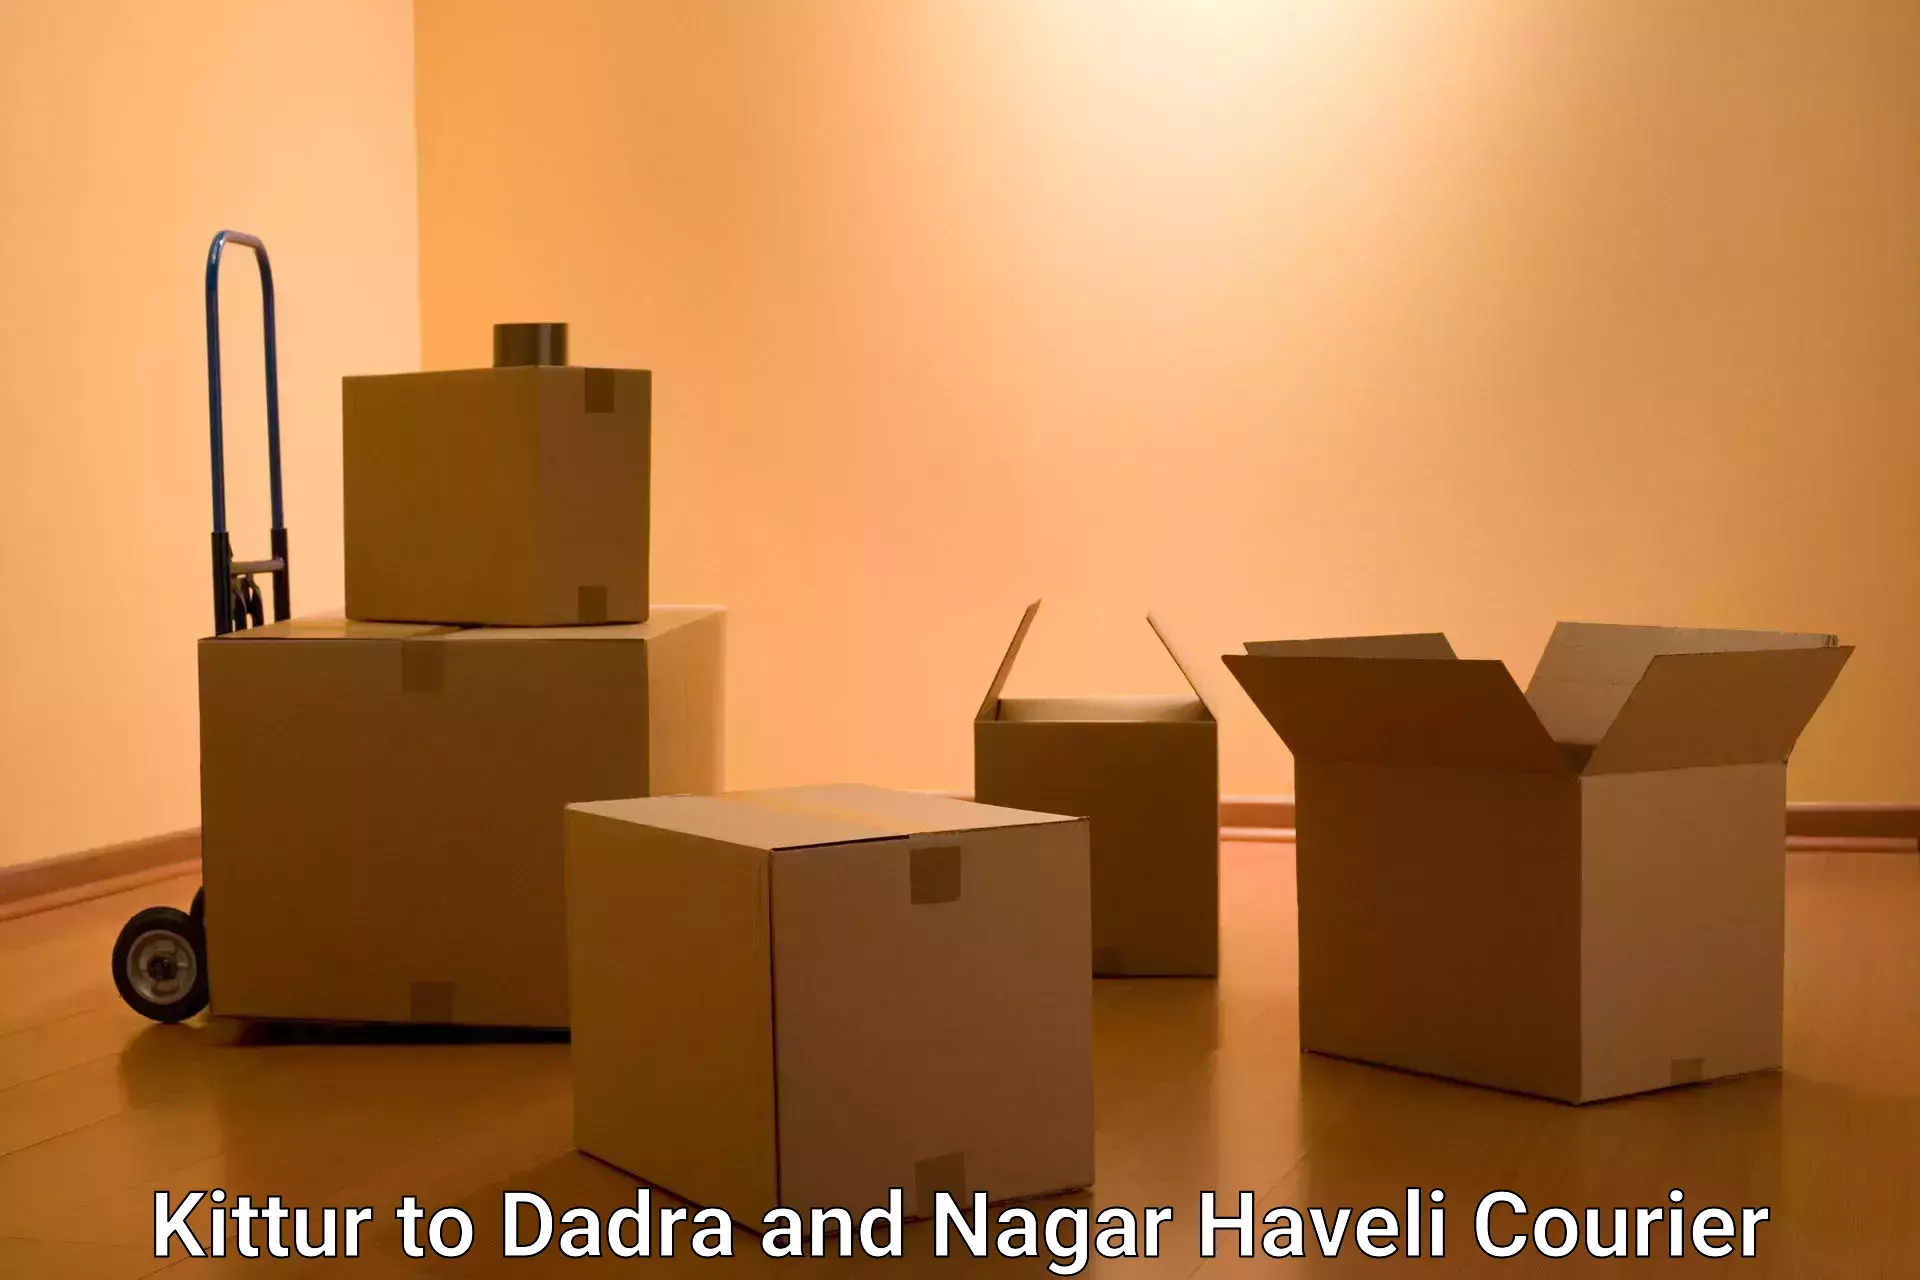 Courier service efficiency Kittur to Dadra and Nagar Haveli